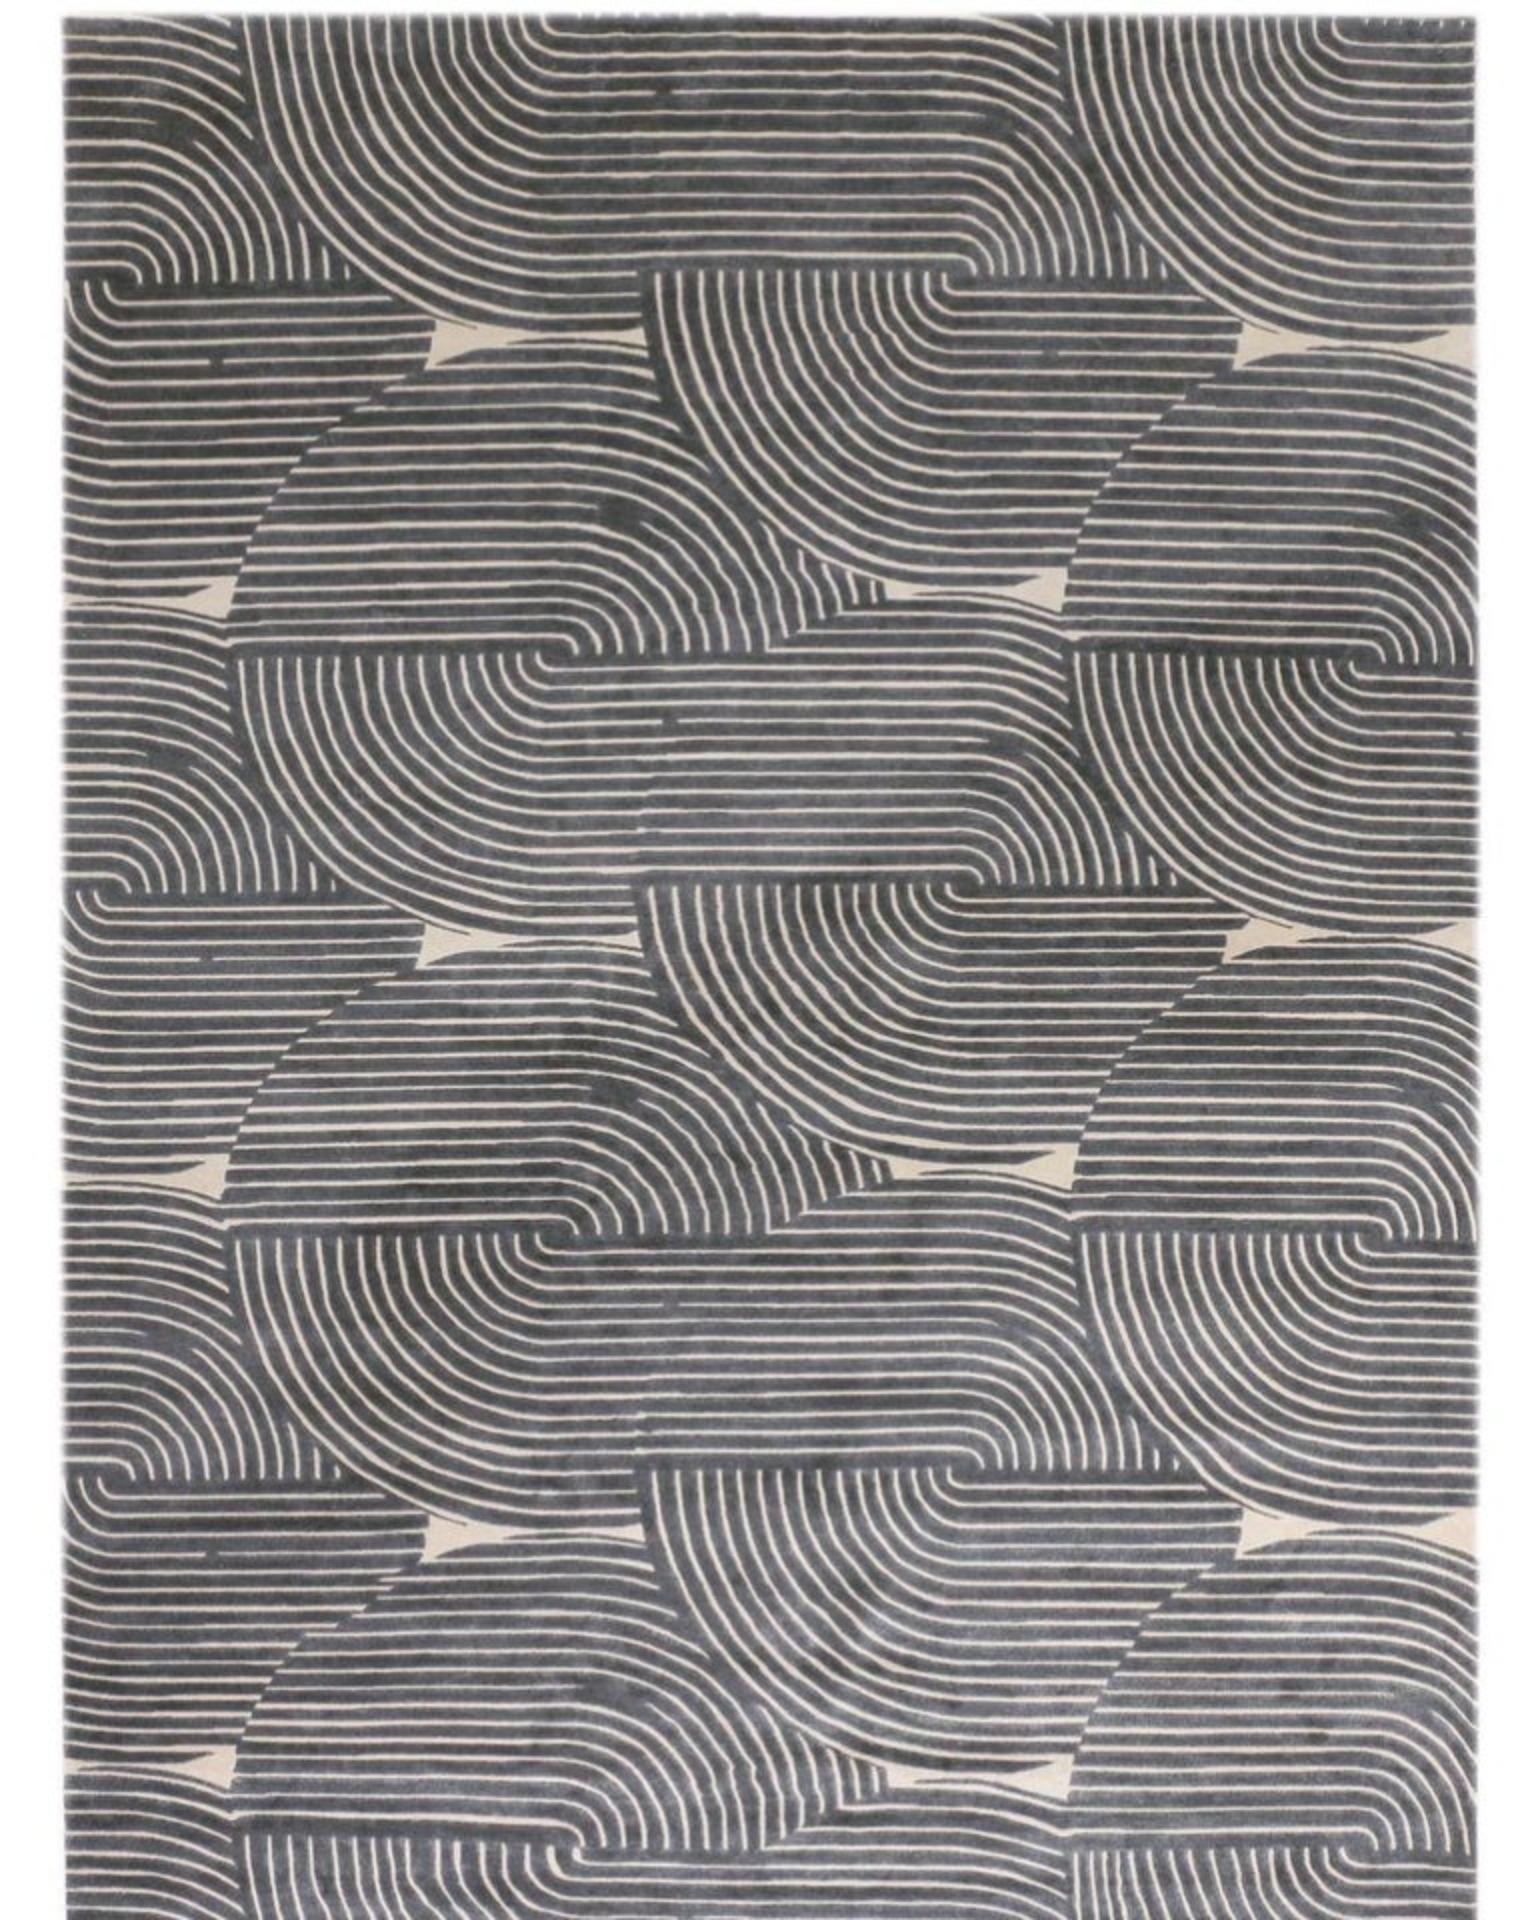 Nightcap rug by Art & Loom
Dimensions: D 243.4 x H 304.8 cm.
Materials: New Zealand wool & Chinese silk
Quality (Knots per Inch): 100
Also available in different dimensions.

Samantha Gallacher has always had a keen eye for aesthetics, drawing